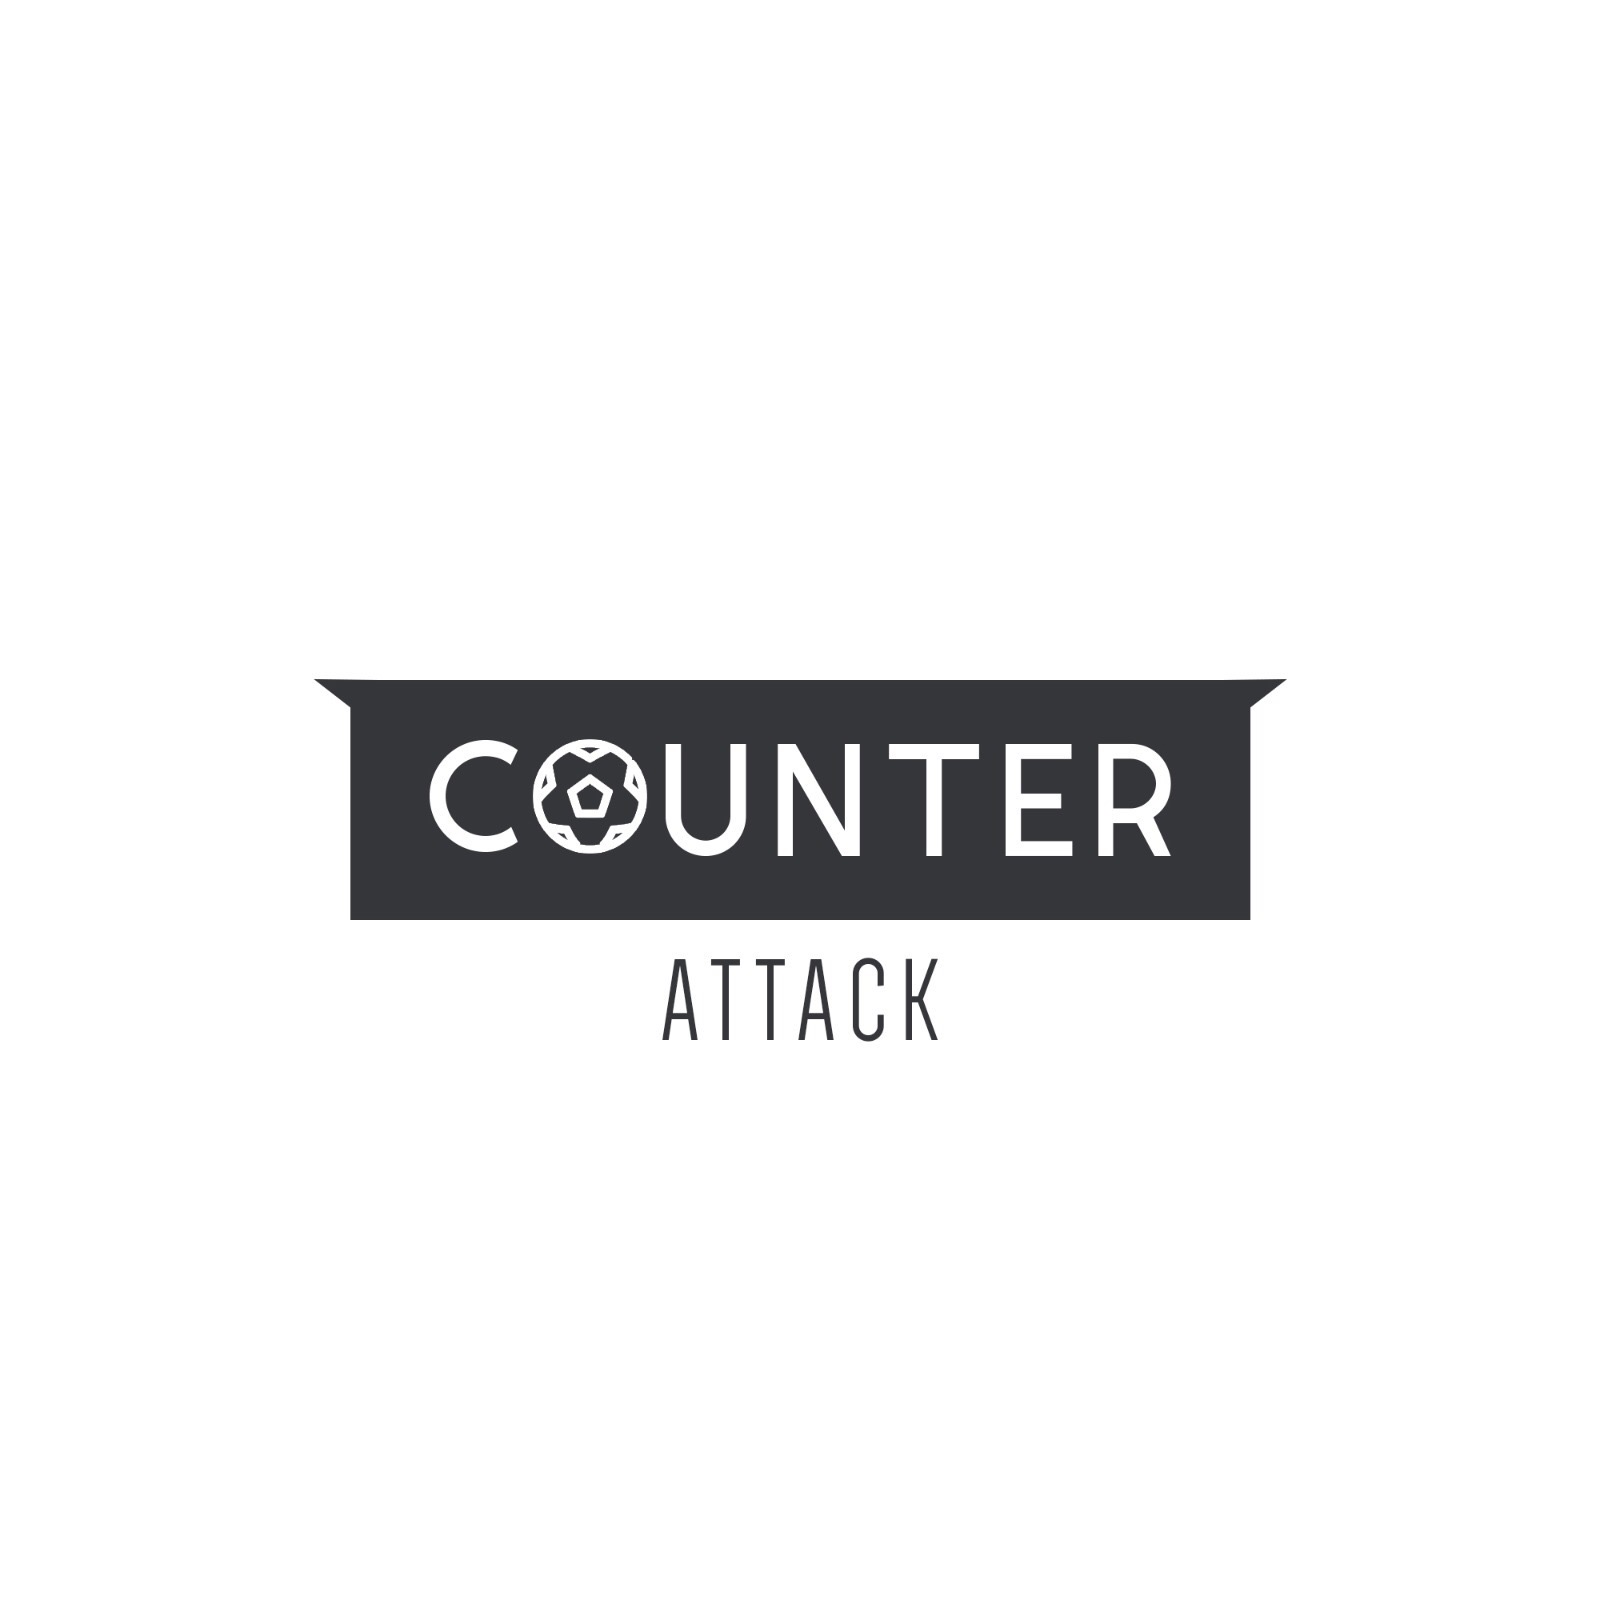 Counter Attack - Episode 173 - Matt Jarvis on the race for Top 4